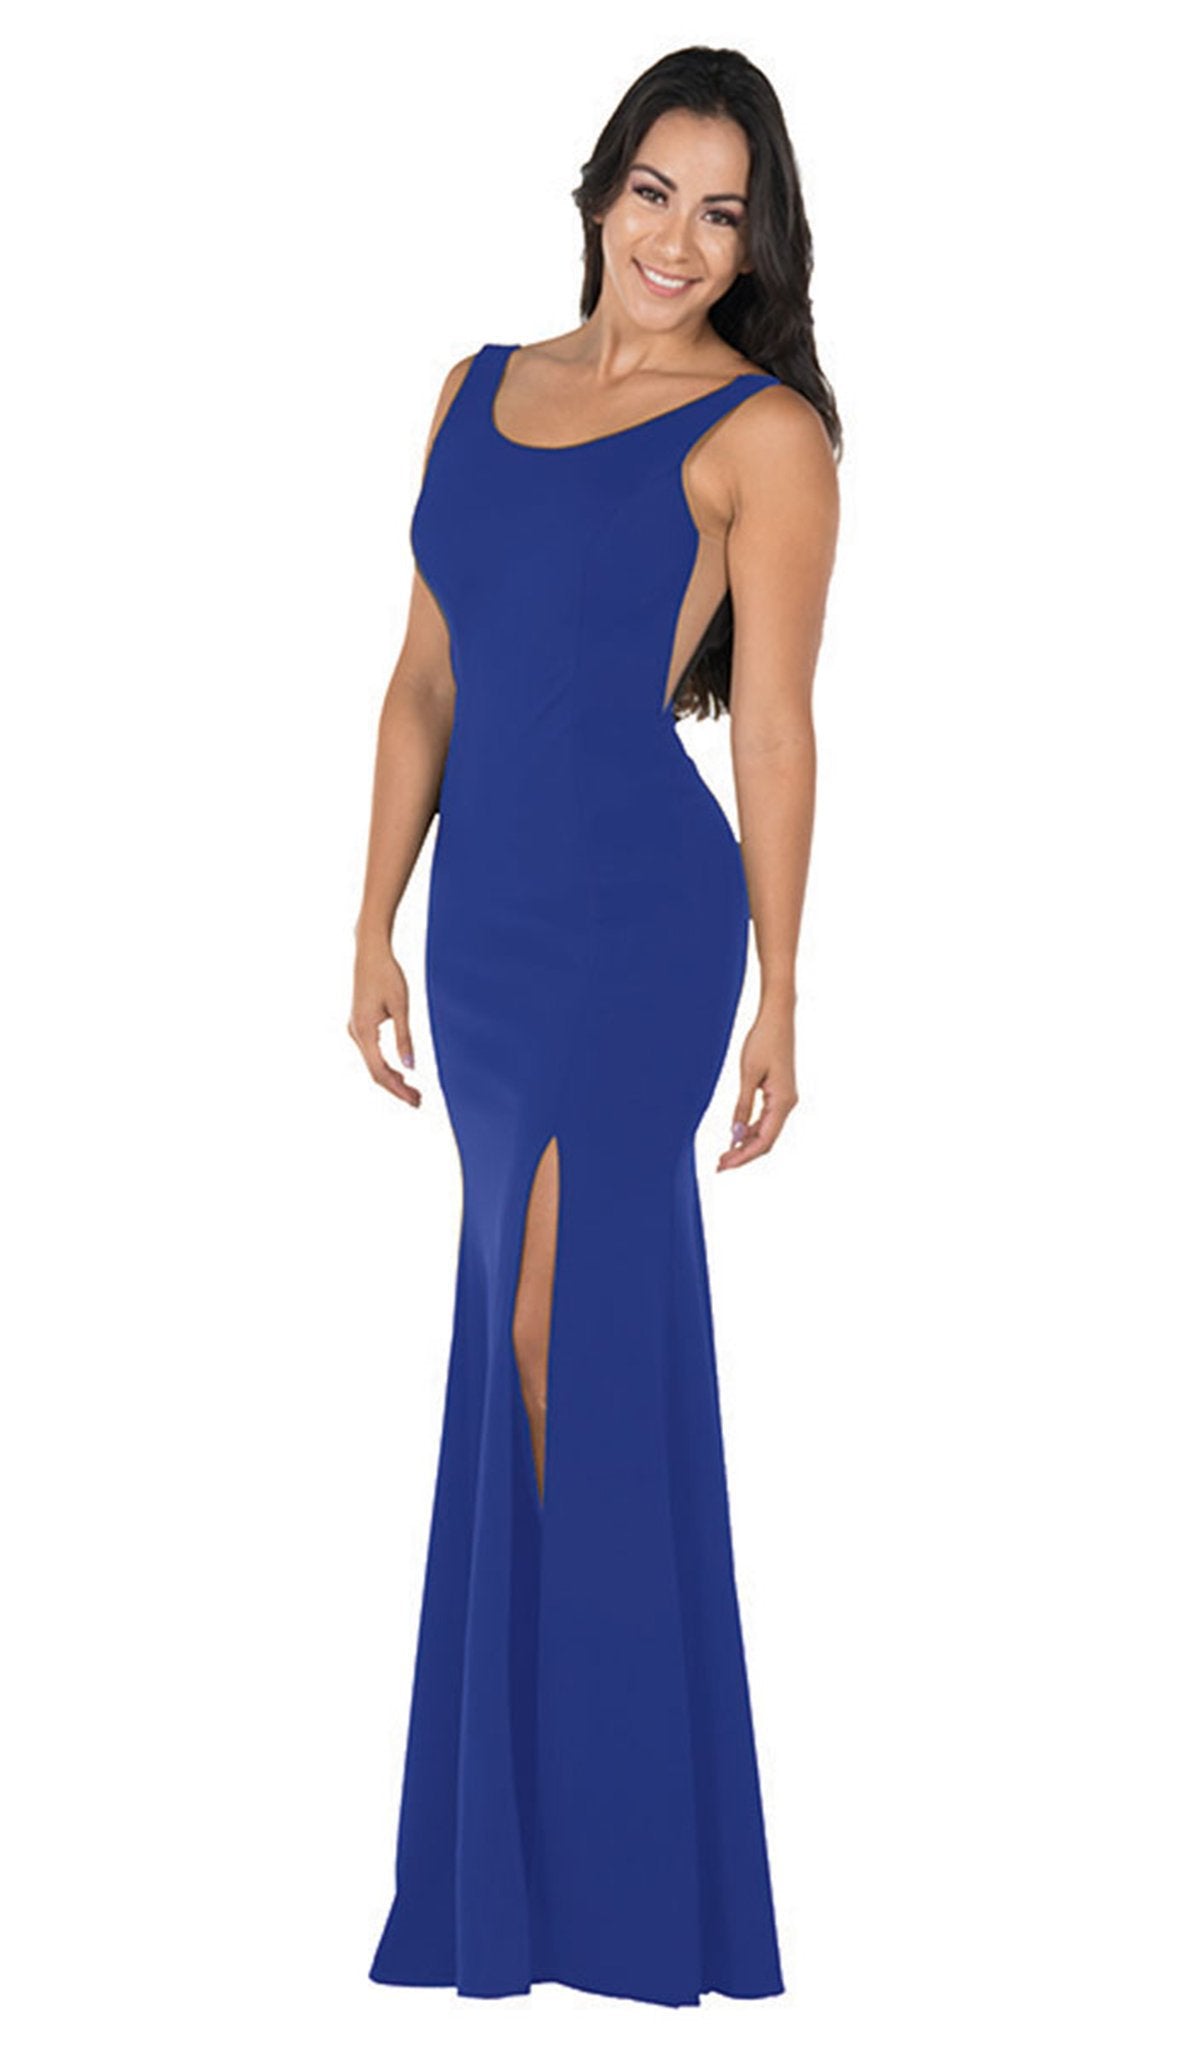 Poly USA - 8168 Illusion Cutout Scoop Jersey Gown
